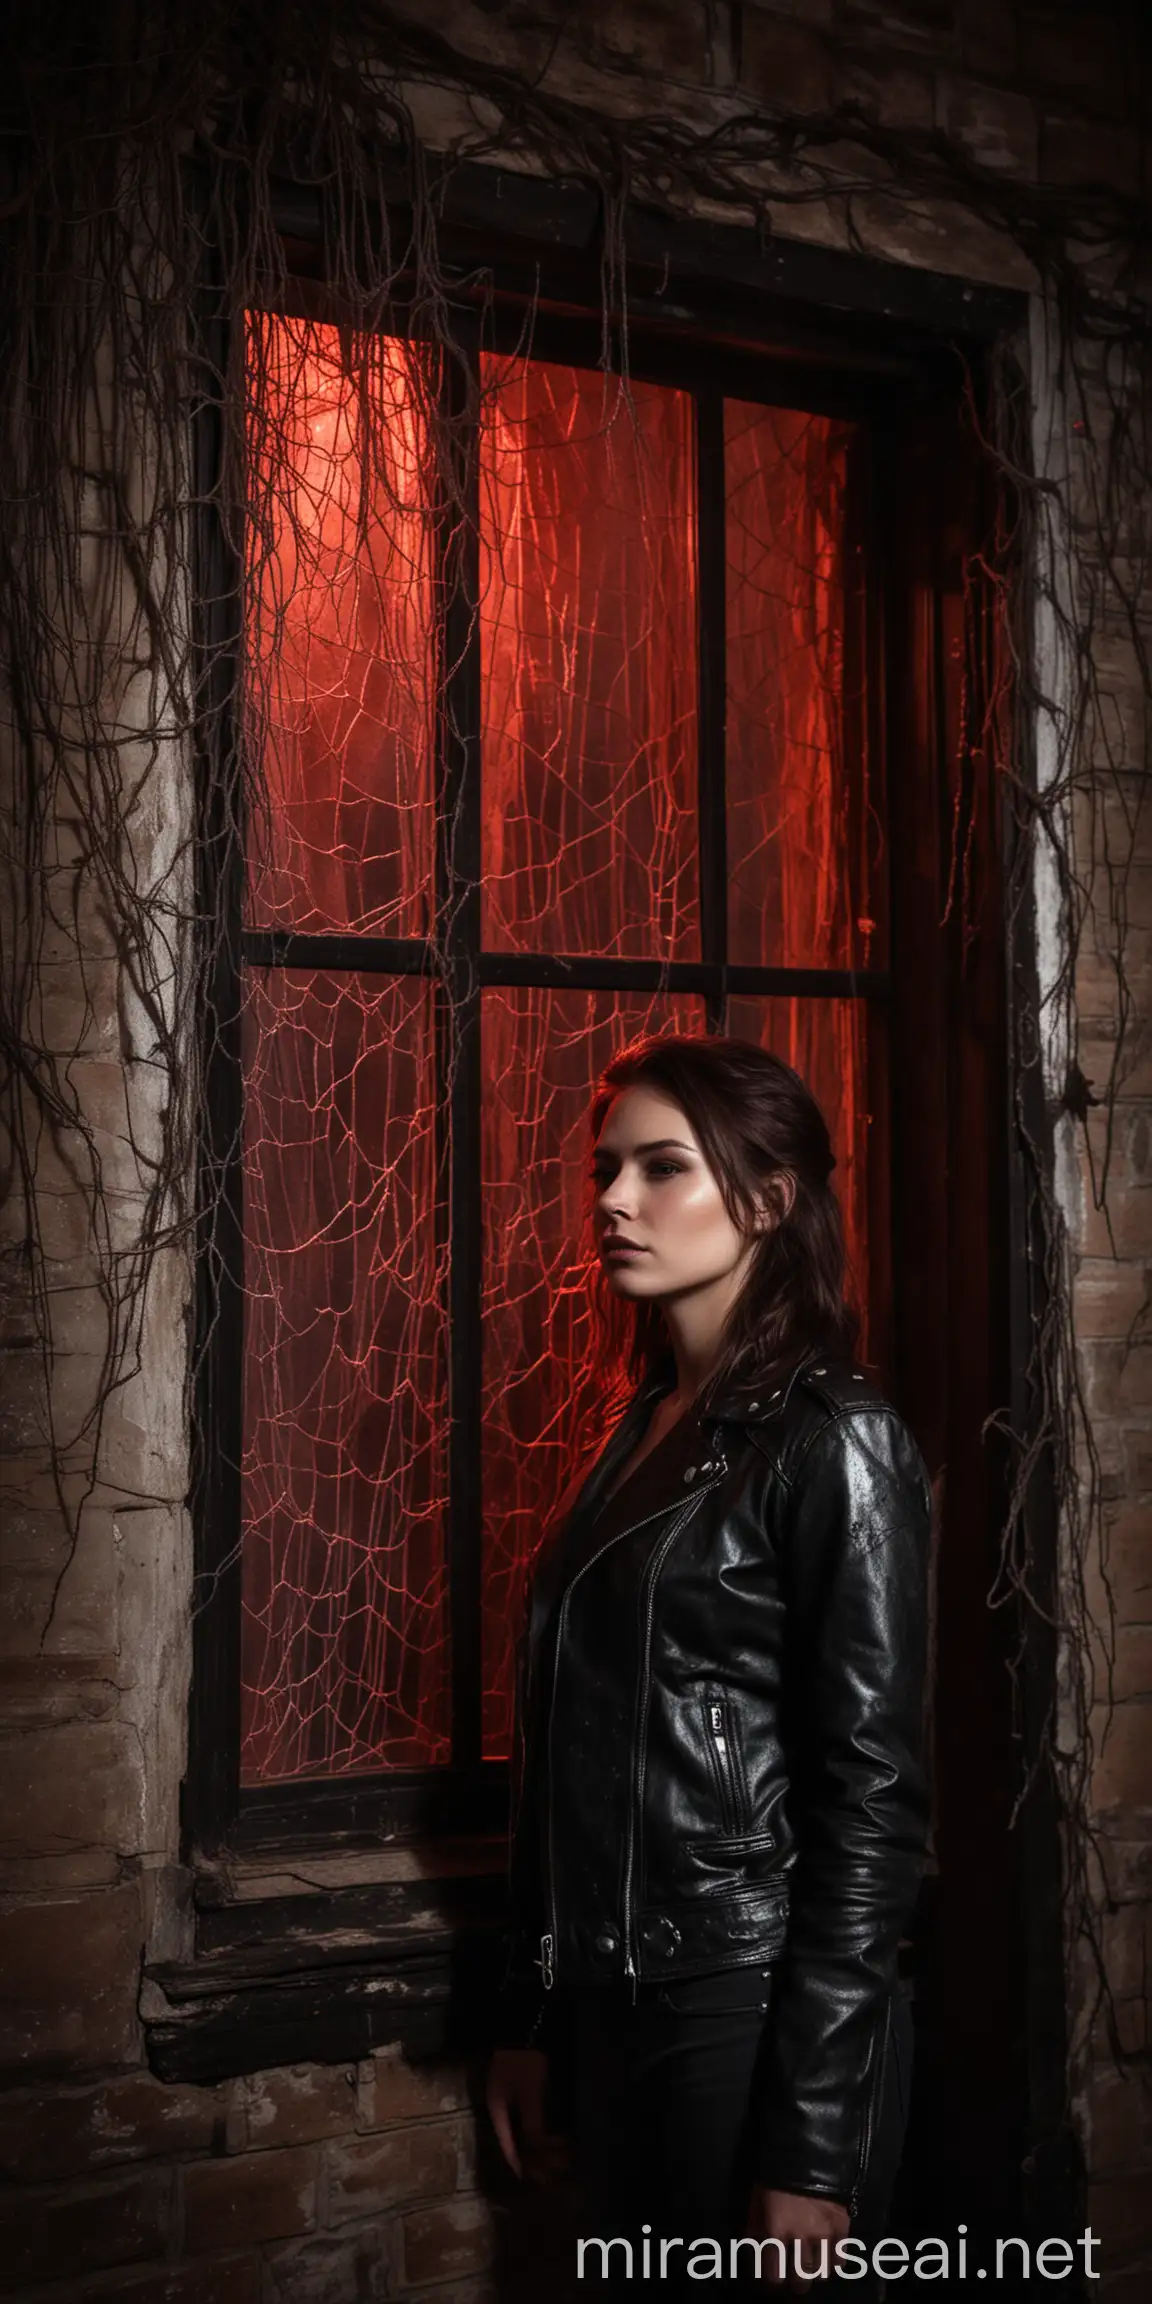 A beautiful lady in a leather jacket, looking out from a dark house with cobwebs and red luminous light behind, with a strange shadow hand above